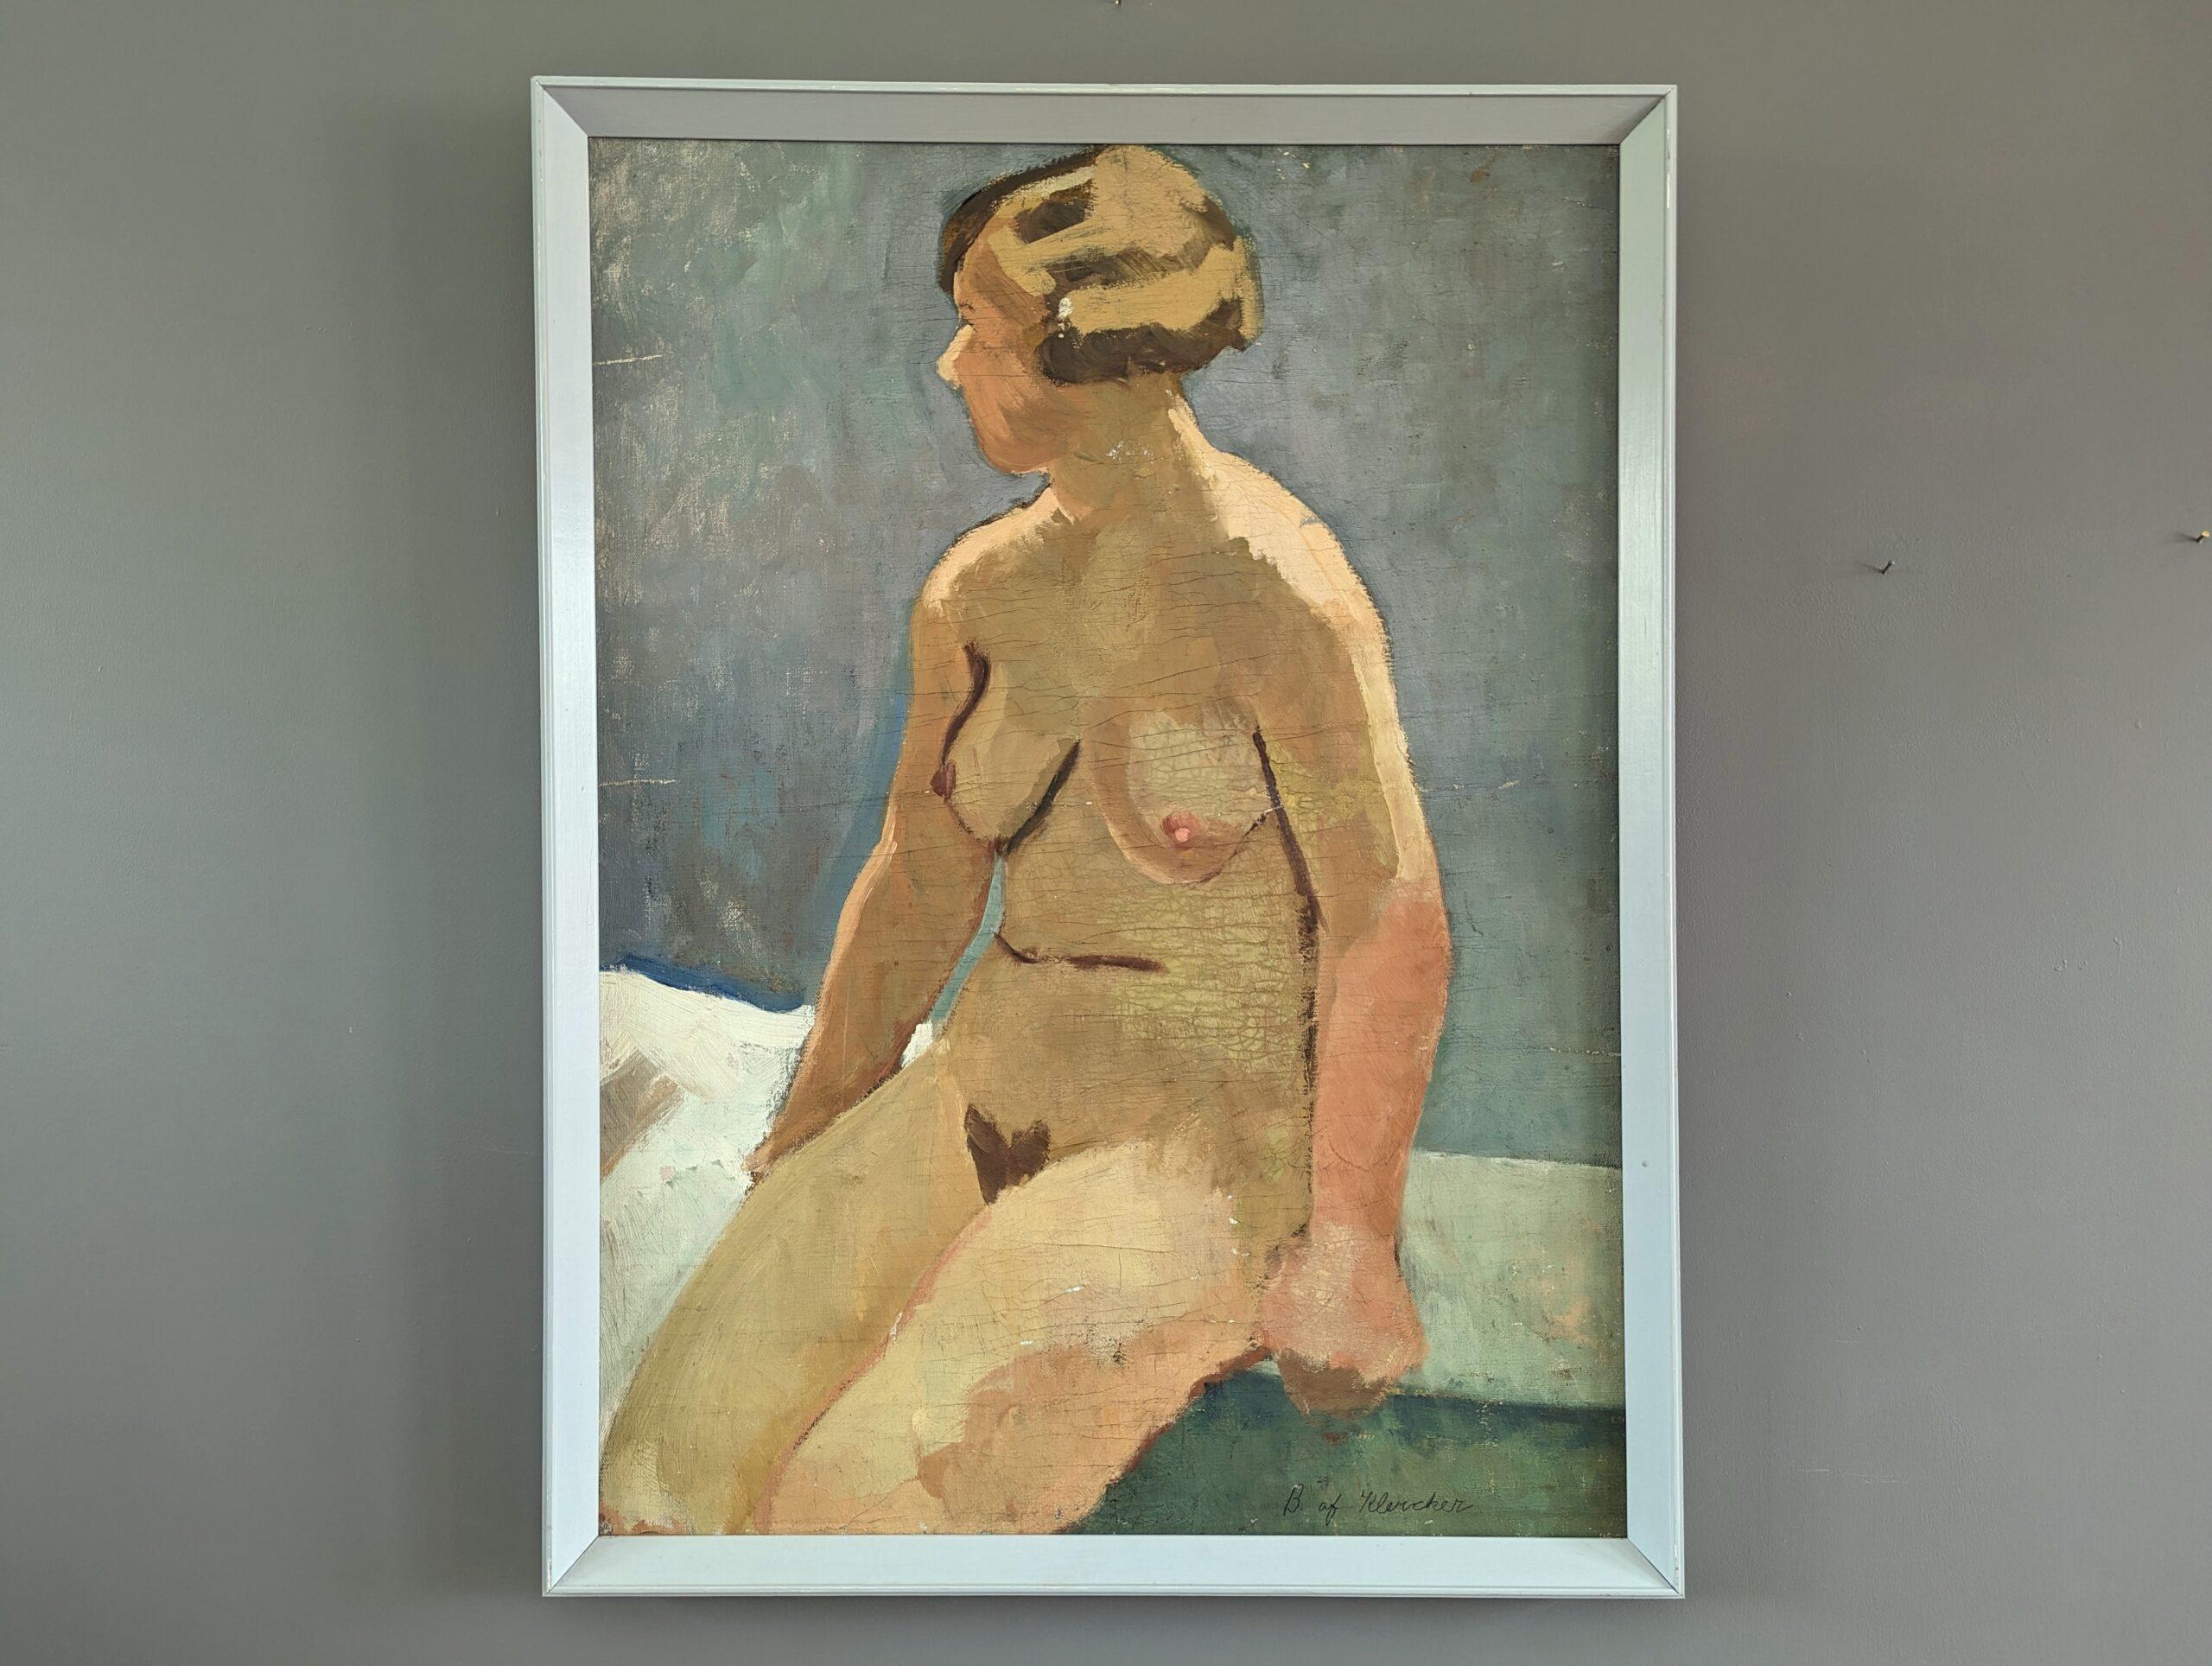 FEMALE FORM
Size: 75 x 56 cm  29.5 x 22.04 inches (including frame)
Oil on Canvas

A brilliantly executed mid-century modernist nude study, painted in oil onto canvas.

In this composition, we see a female figure seated on the edge of the surface,